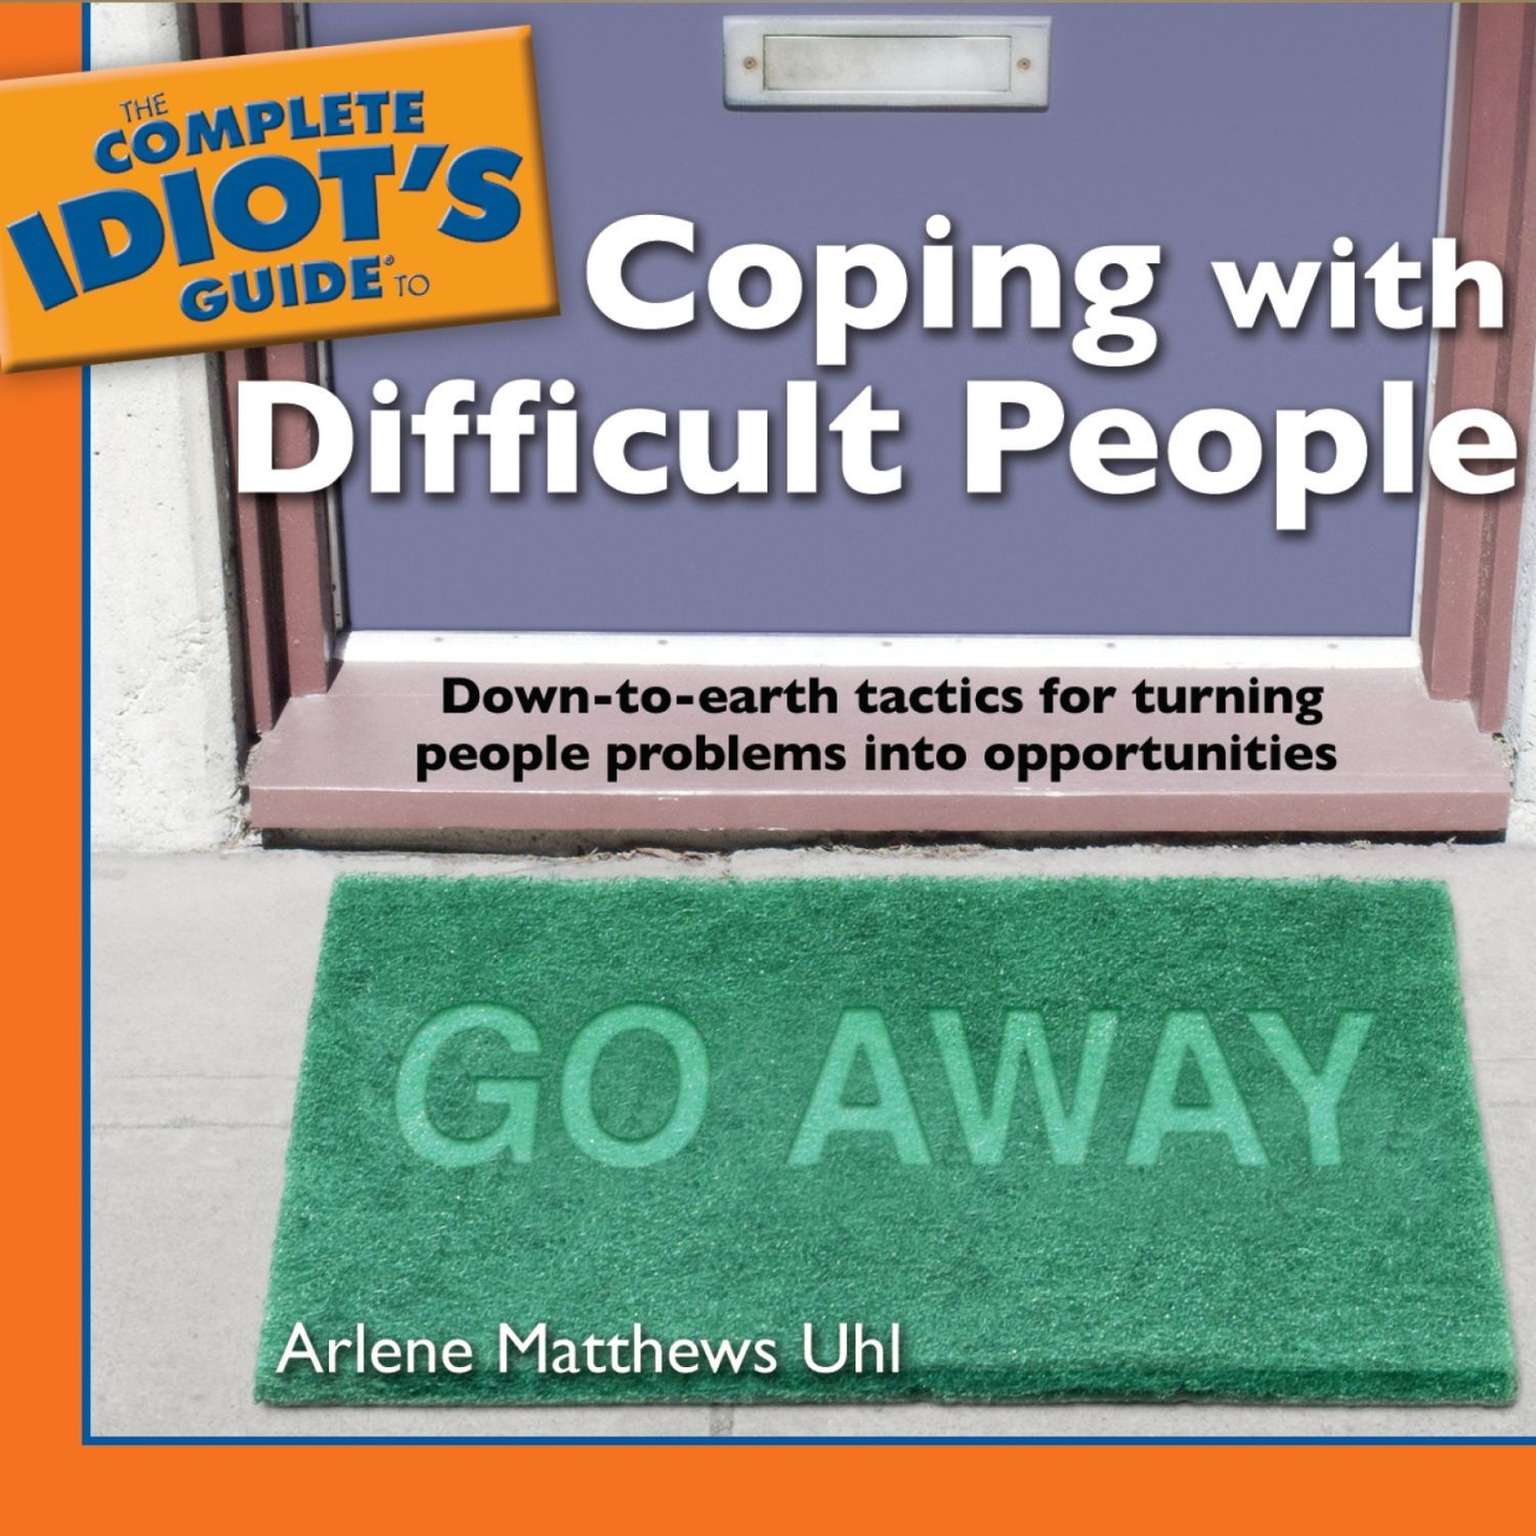 The Complete Idiot’s Guide to Coping with Difficult People (Abridged) Audiobook, by Arlene Matthews Uhl